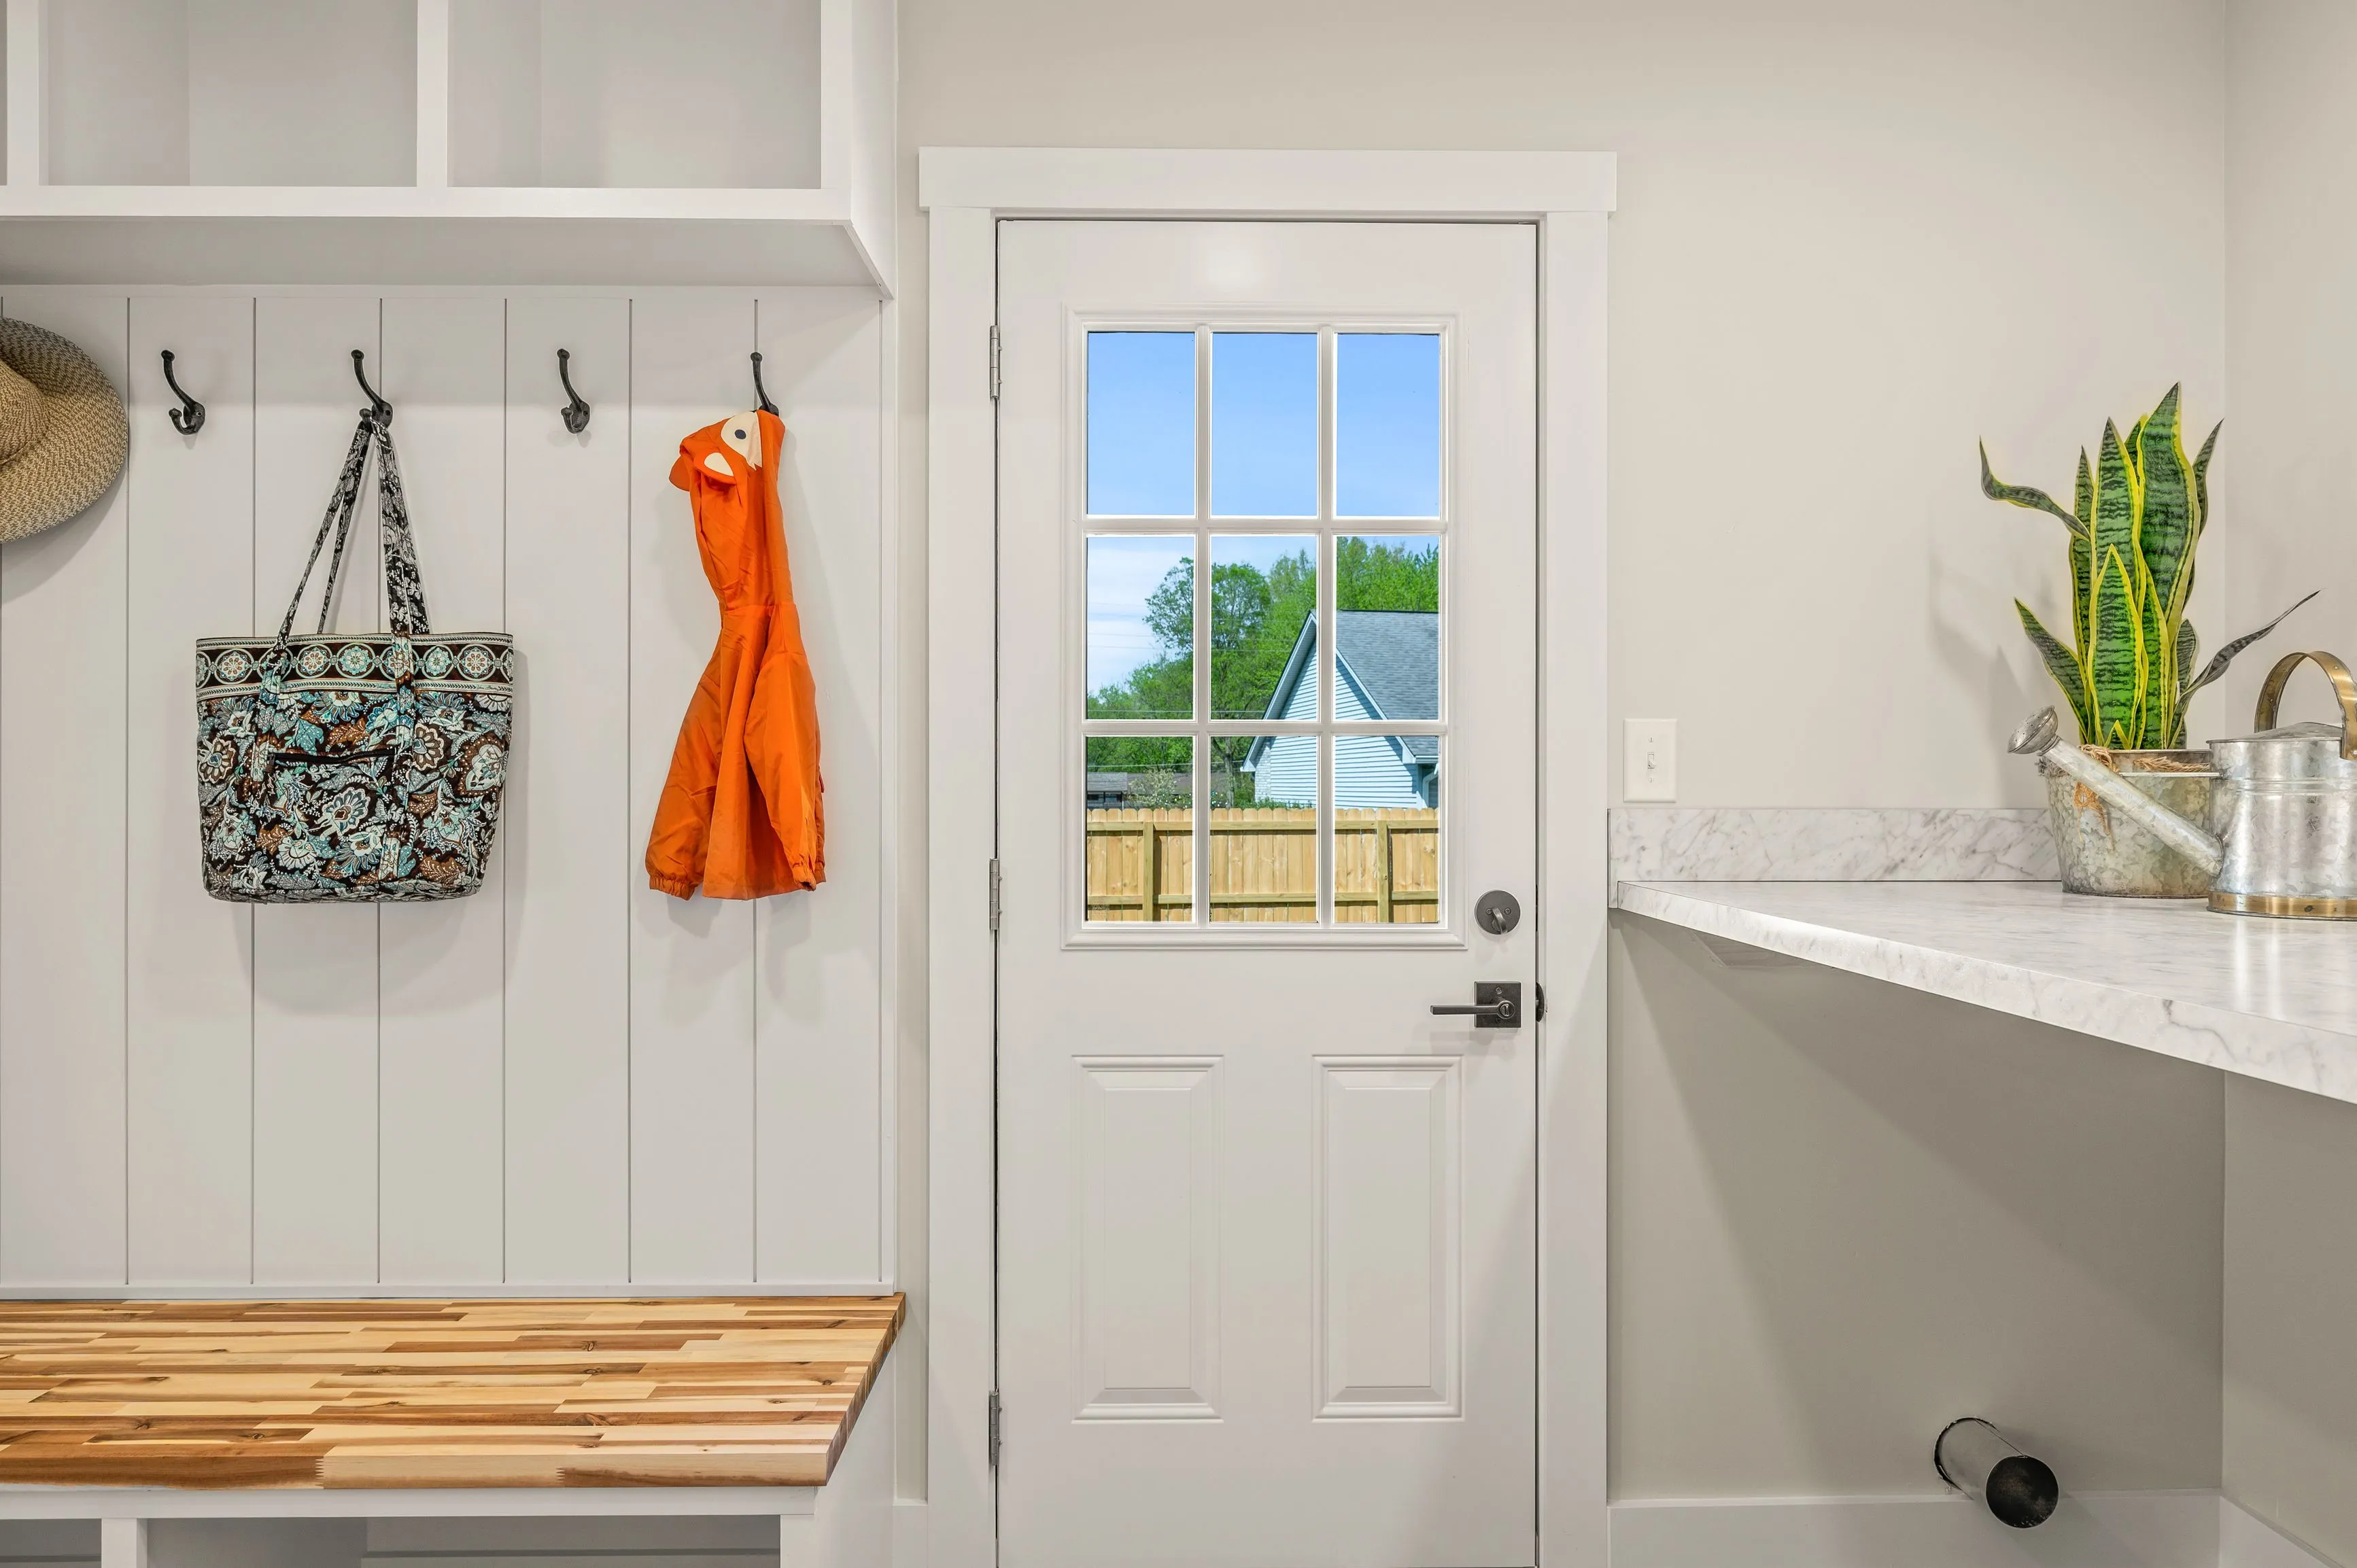 Bright, modern mudroom with white walls, a bench seat, hooks with hanging bags, and a back door with a window showing outdoor greenery.